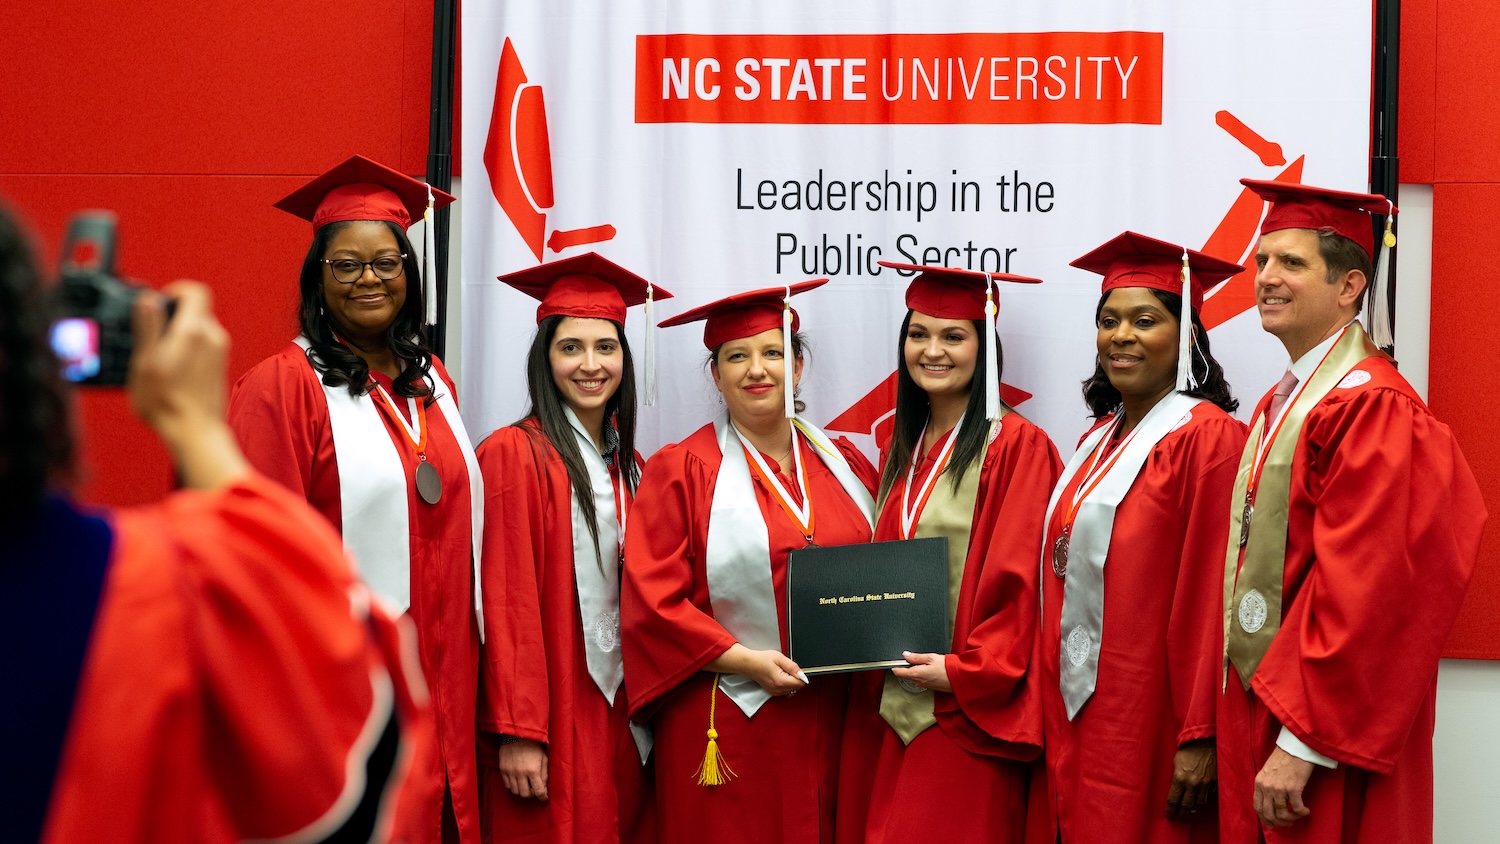 Graduates in front of an NC State University Leadership in the Public sector banner.